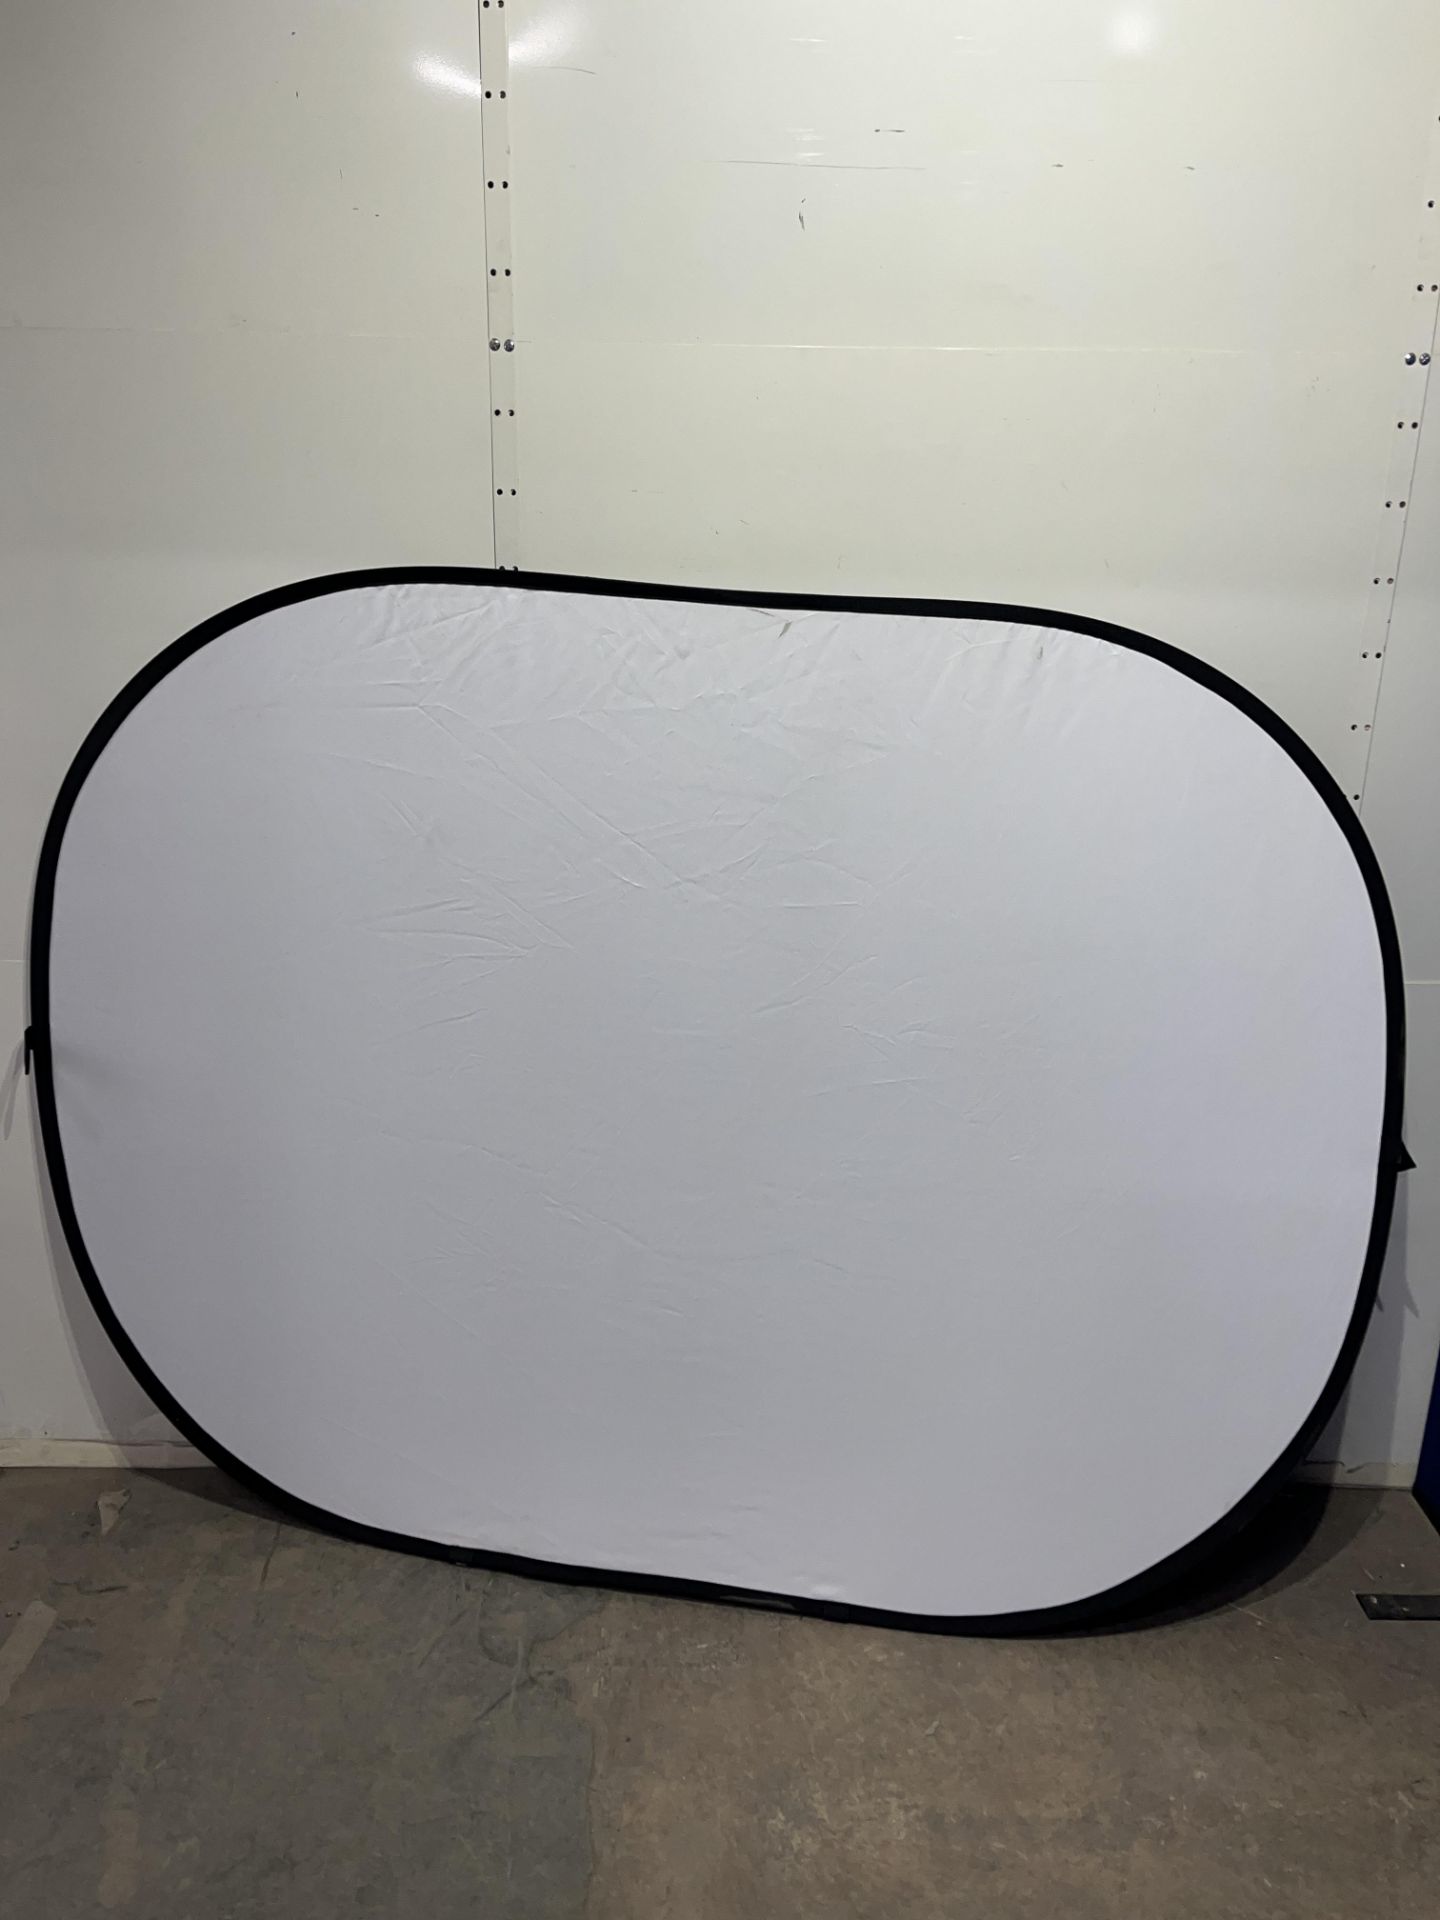 Foldable Photography Backdrop with Storage Bag - Image 3 of 5